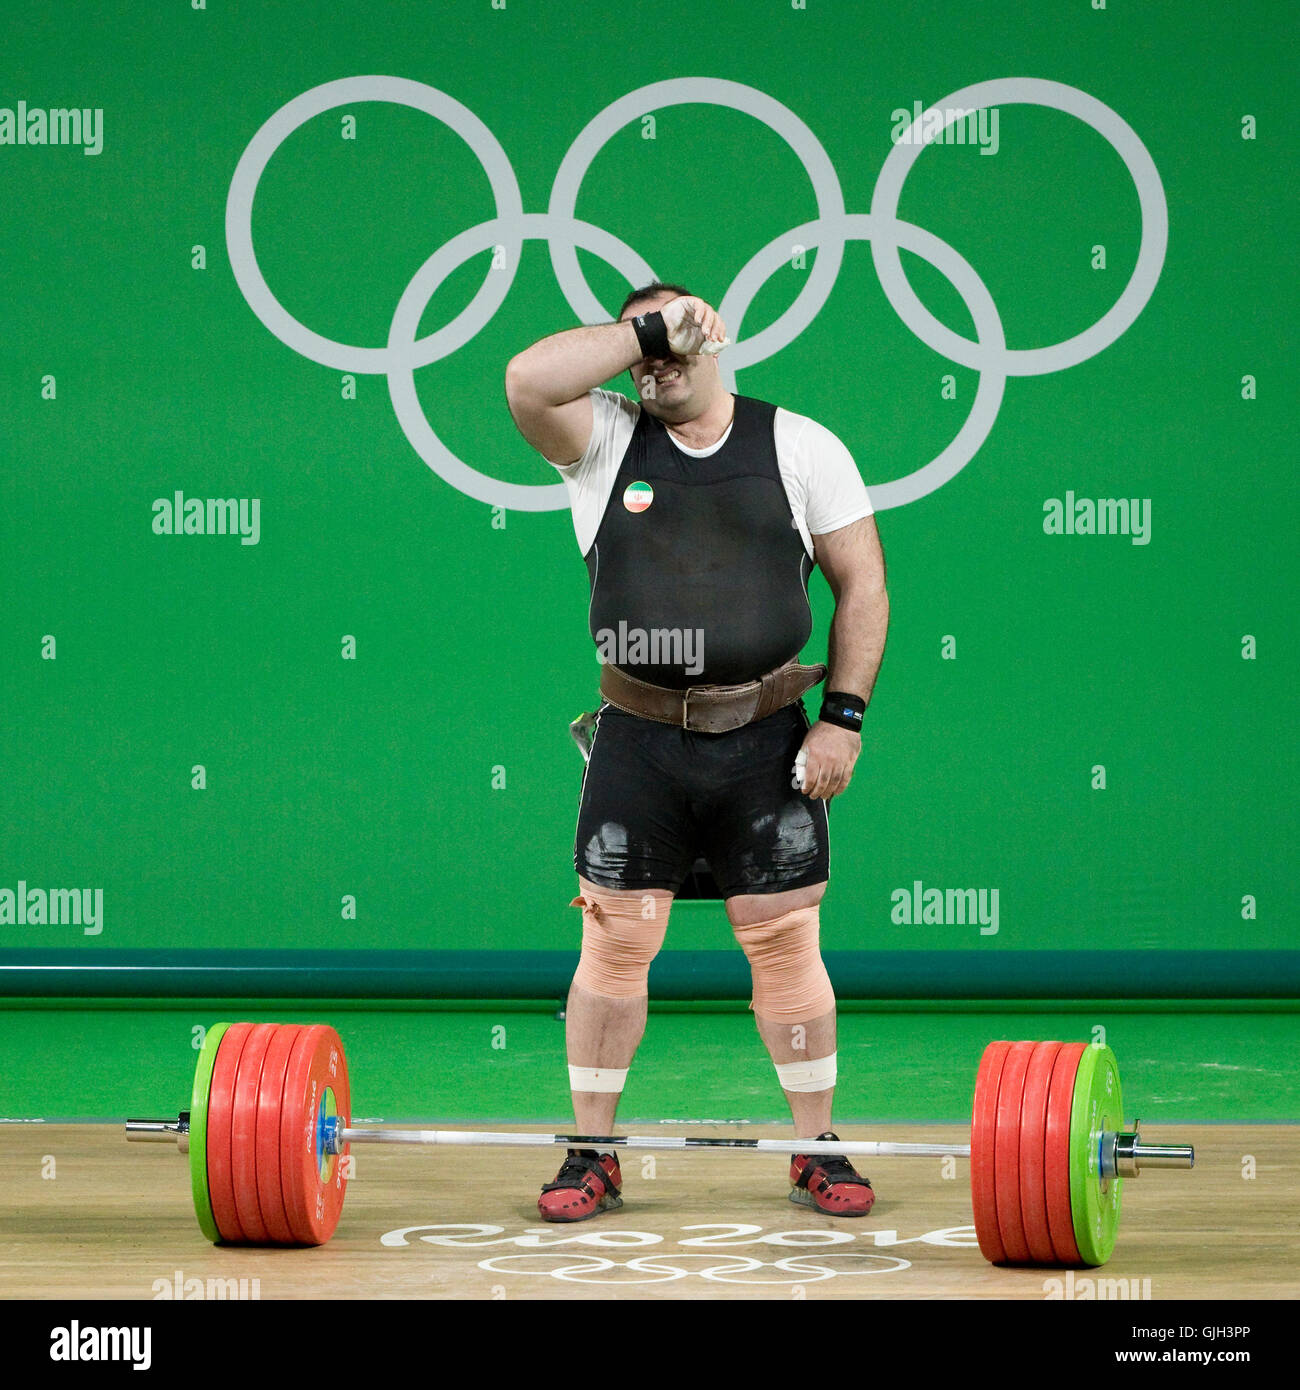 Rio de Janeiro, Brazil. 16th Aug, 2016. Gold medal favorite BEHDAD SALIMI of Iran reacts after bombing out in the clean and jerk during the men's  105kg weightlifting final at the Rio 2016 Summer Olympic Games. Credit:  Paul Kitagaki Jr./ZUMA Wire/Alamy Live News Stock Photo